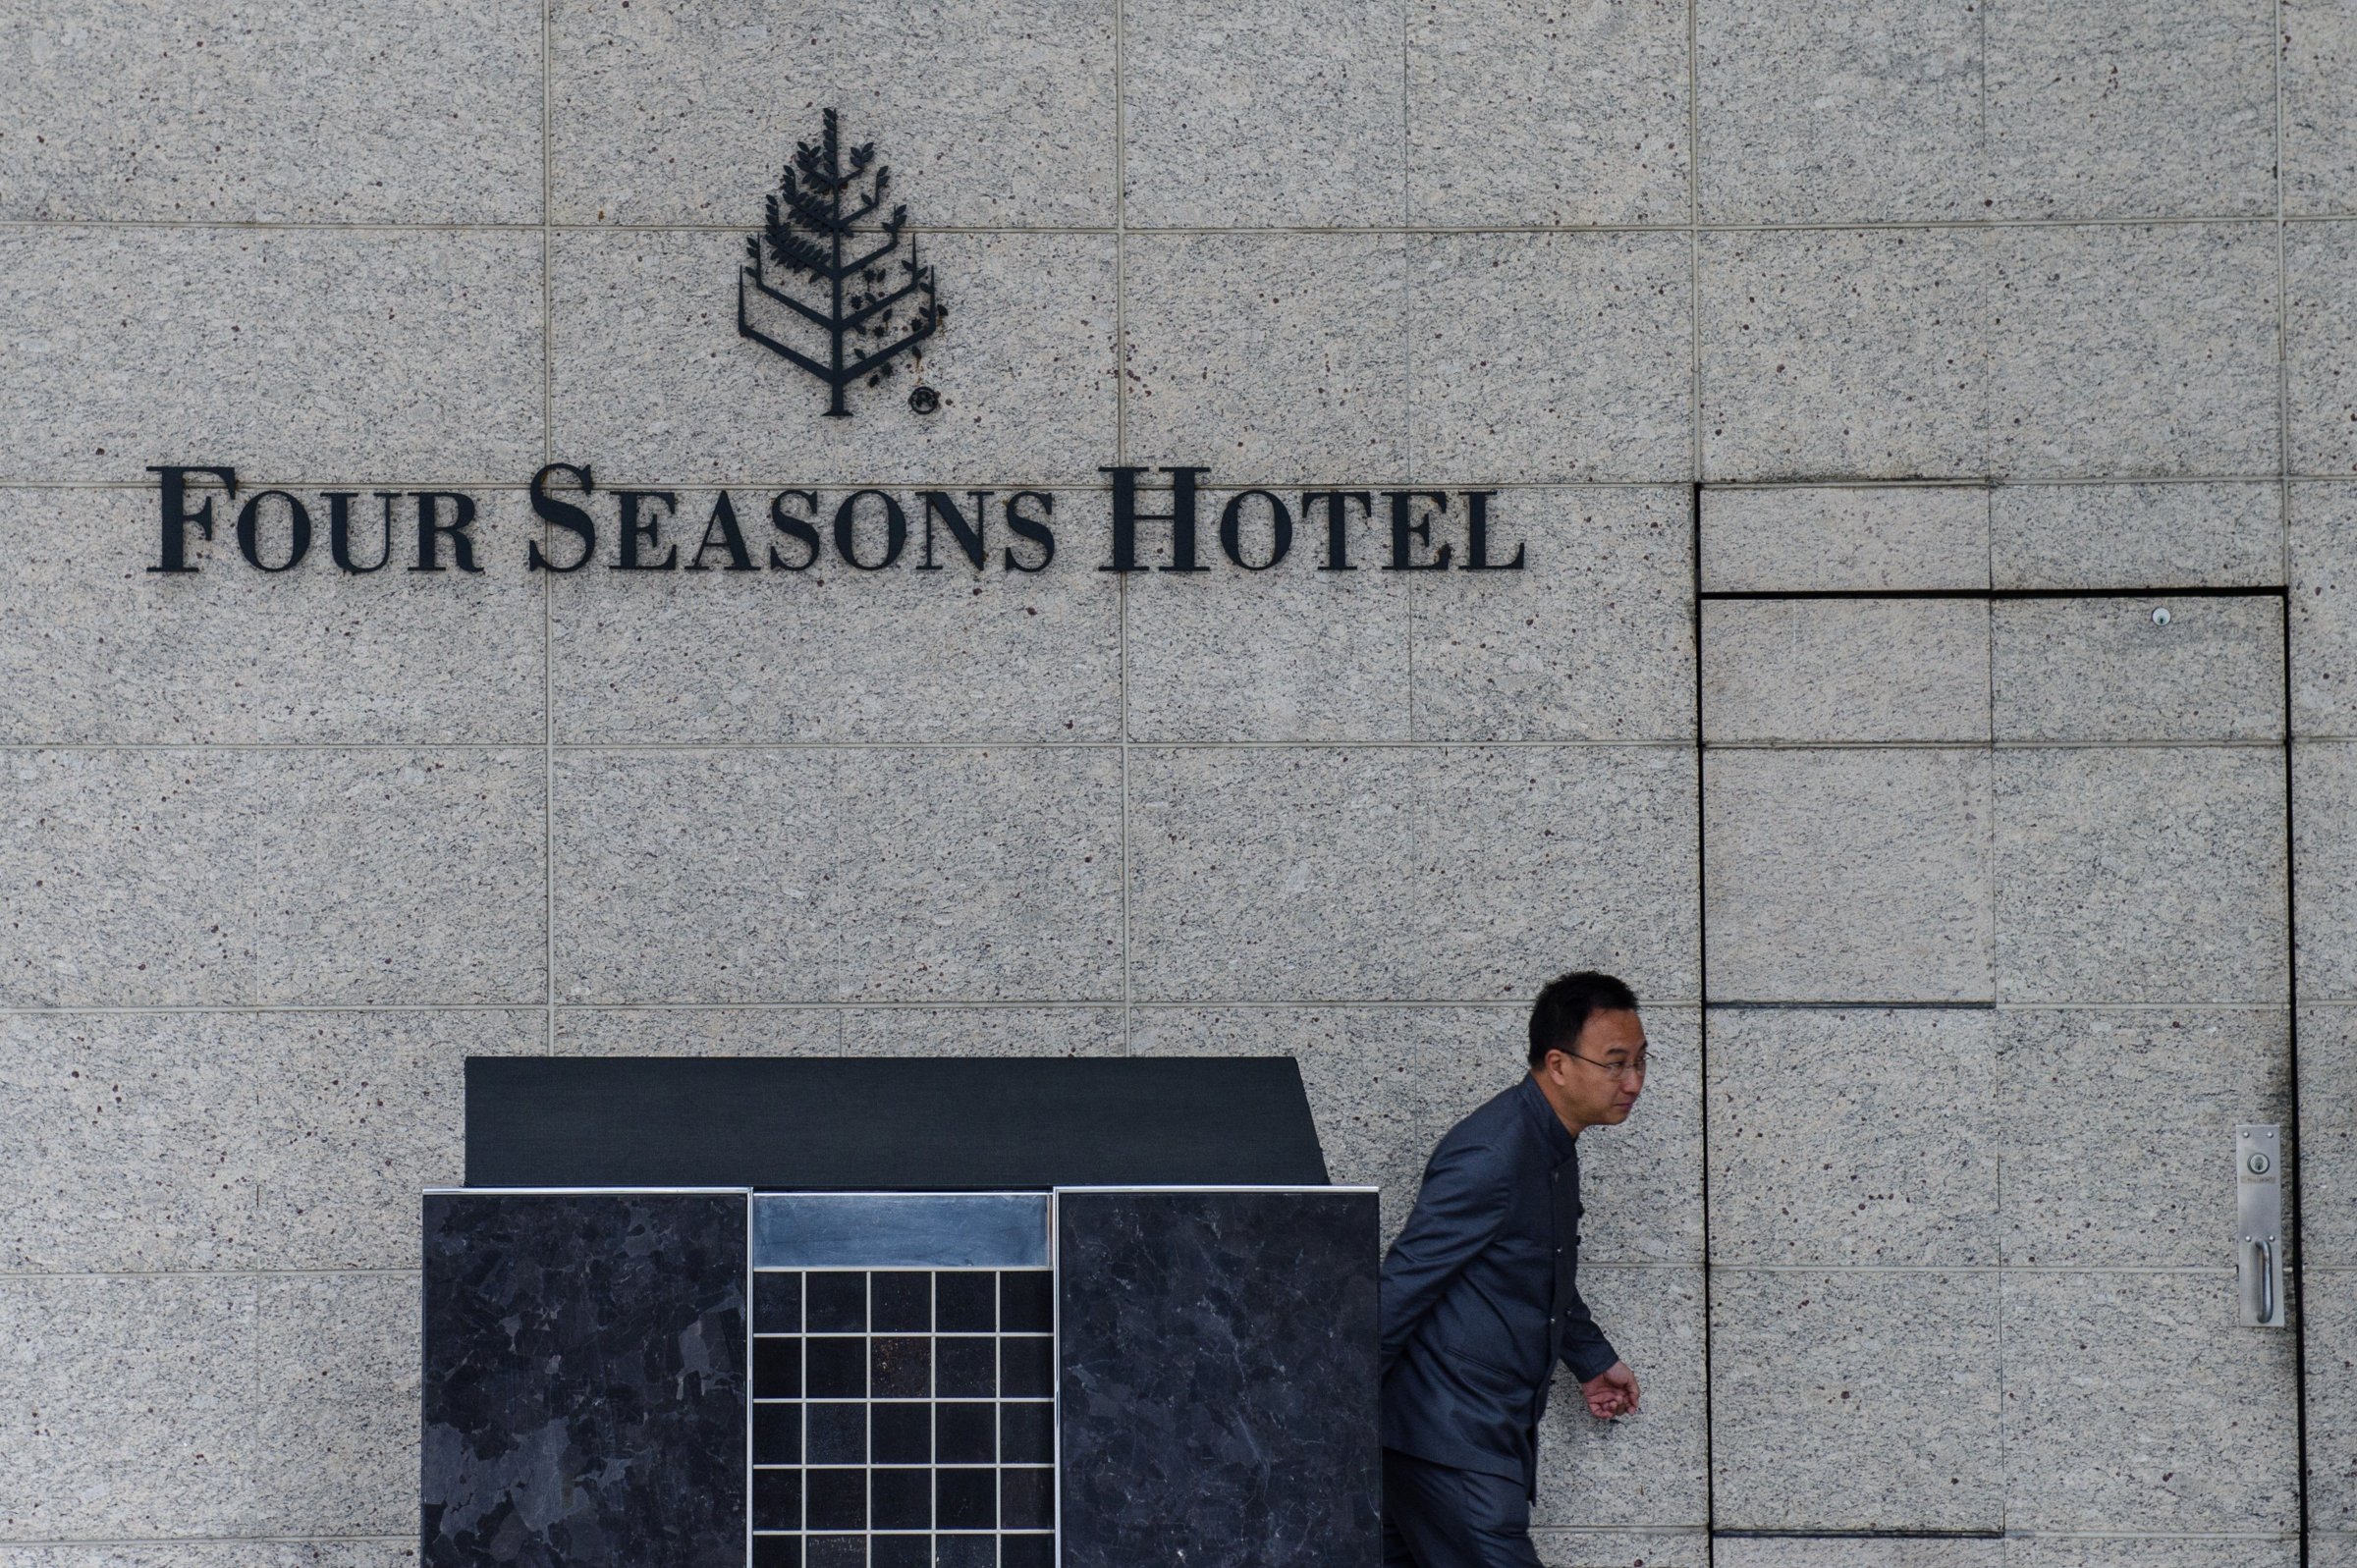 A member of staff walks outside the Four Seasons Hotel in Hong Kong on February 1, 2017. A Chinese billionaire has been abducted in Hong Kong by mainland agents, according to reports on January 31, triggering more concerns over security in the city after the disappearance of five booksellers.